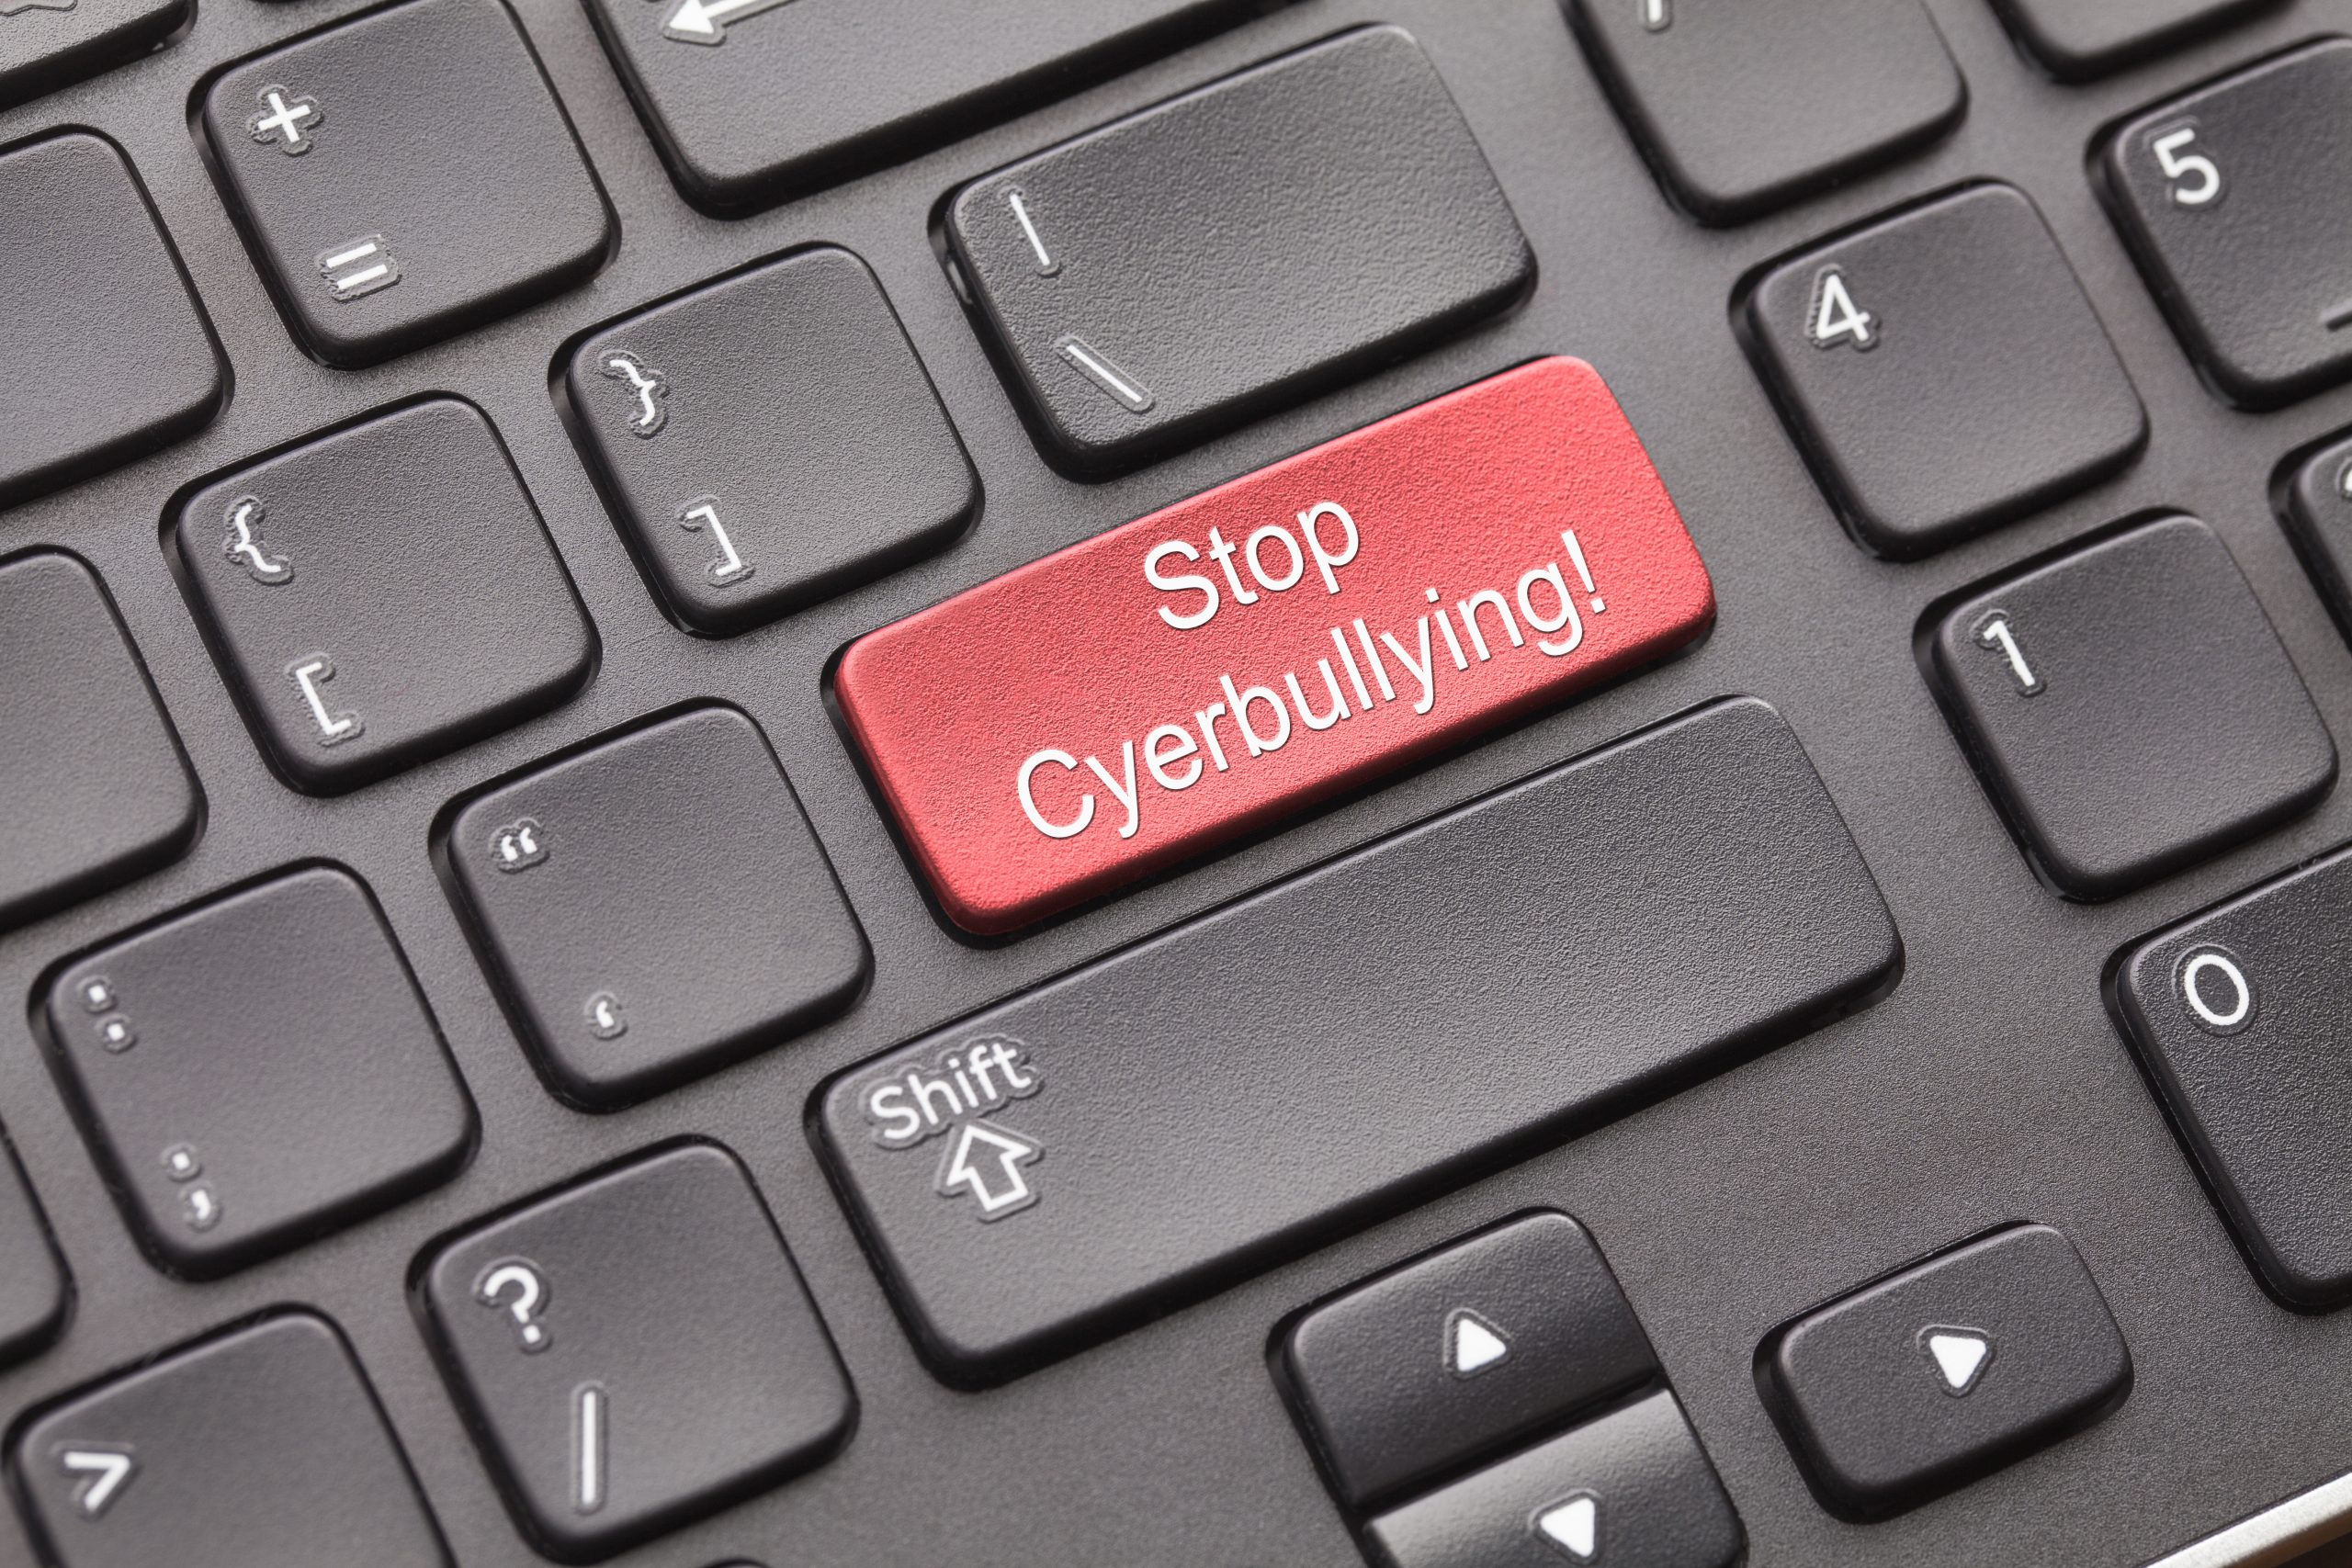 Photograph of a keyboard, with an added red key with the words Stop Cyberbullying